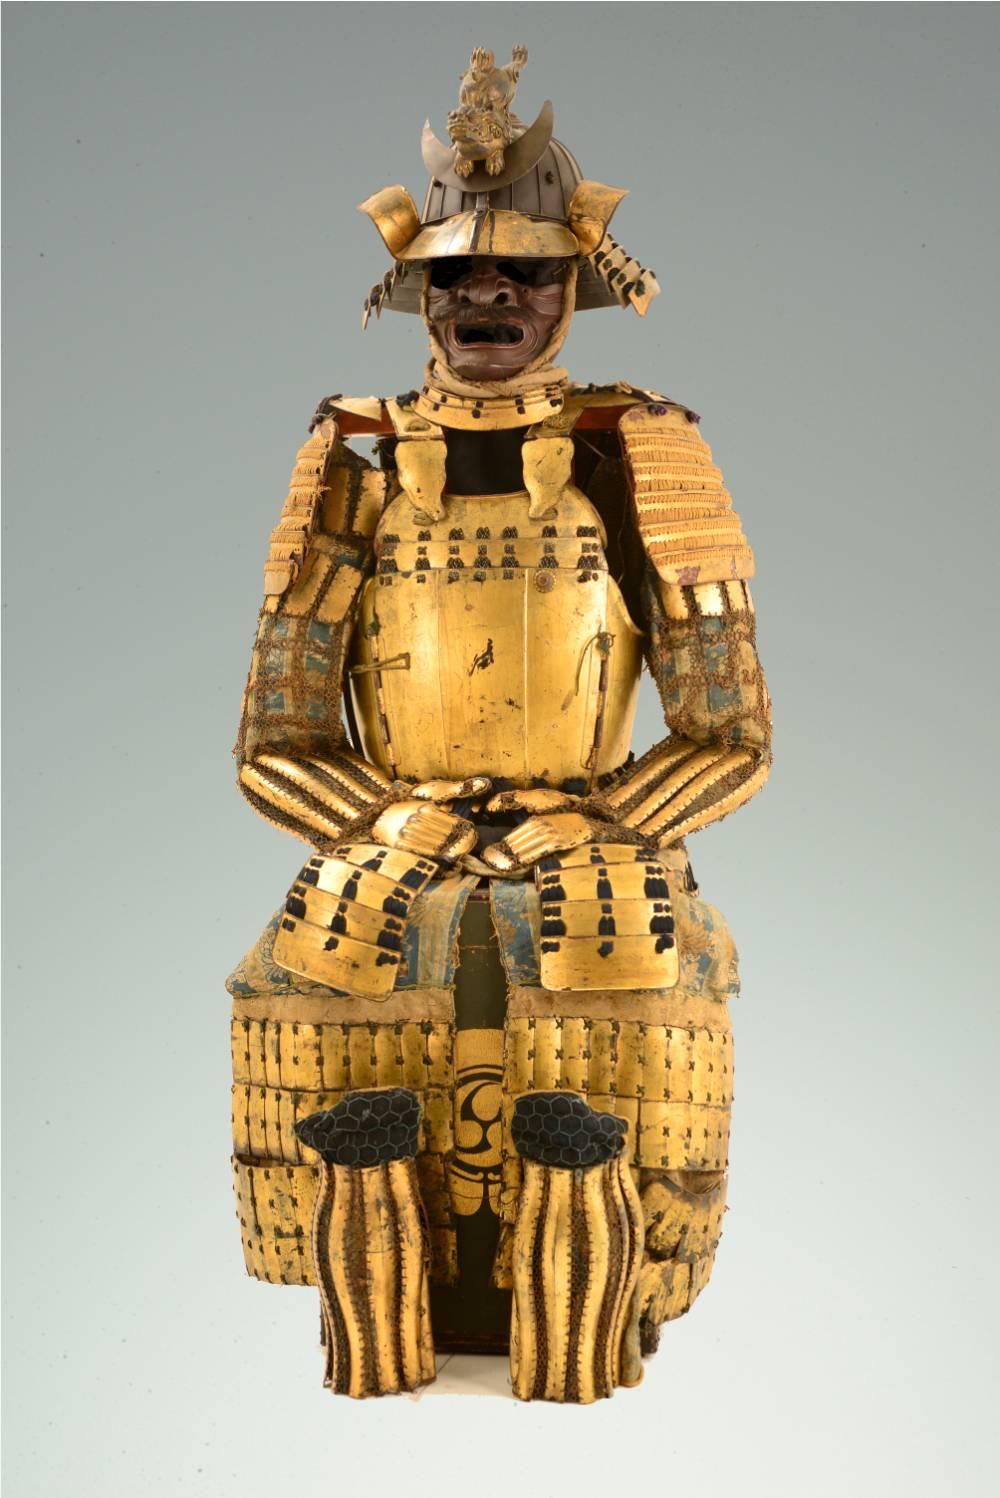 Eighteenth century iron samurai battle harness in the style of Date Masumune, lord daimyō of Sendai Province, lacquered gold.  Masamune's followers adopted the heavy, war-like Sendai style breastplate popularize by their master.  The heavy iron